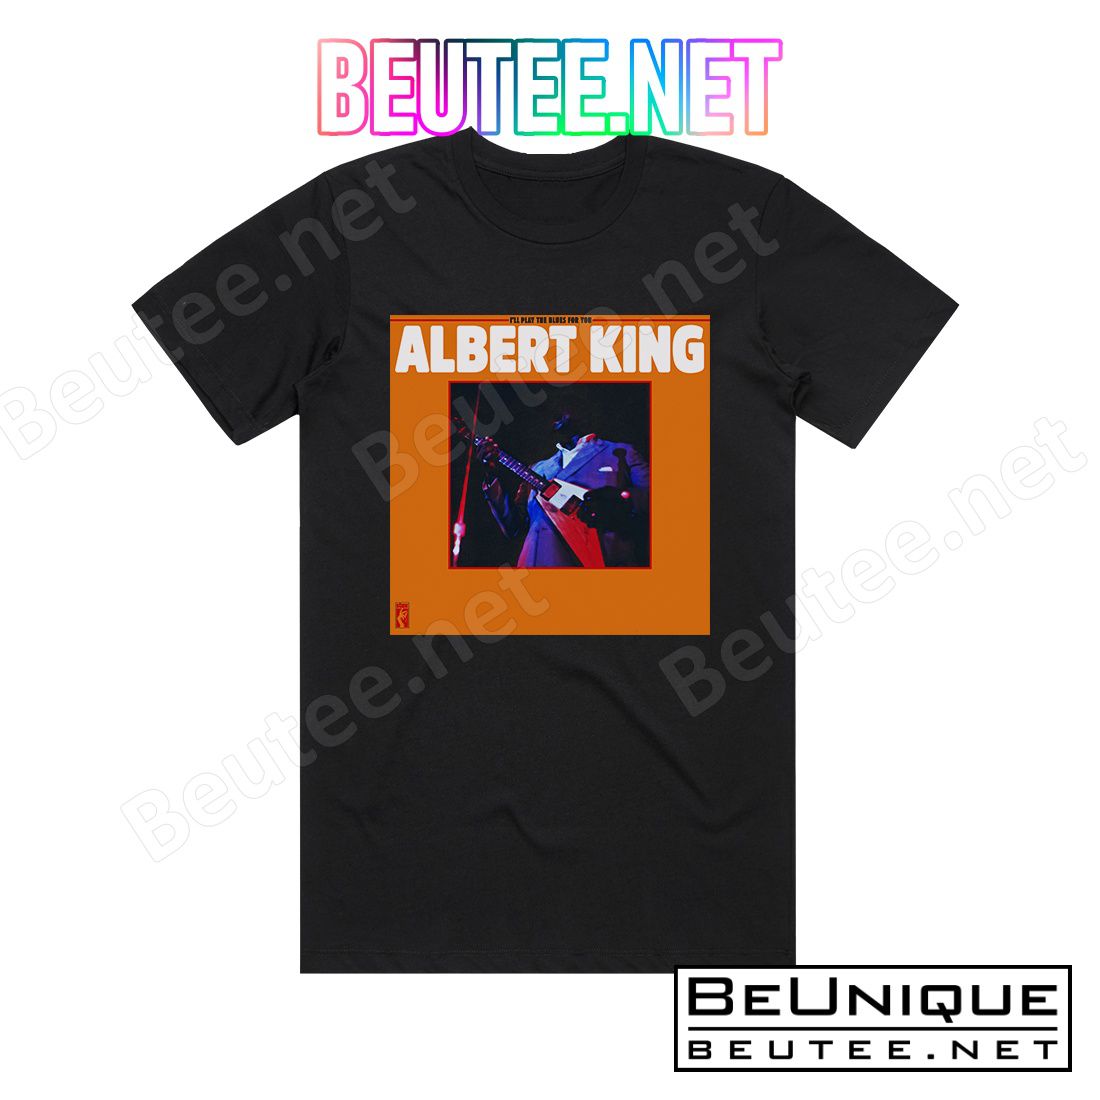 Albert King Ill Play The Blues For You 1 Album Cover T-Shirt